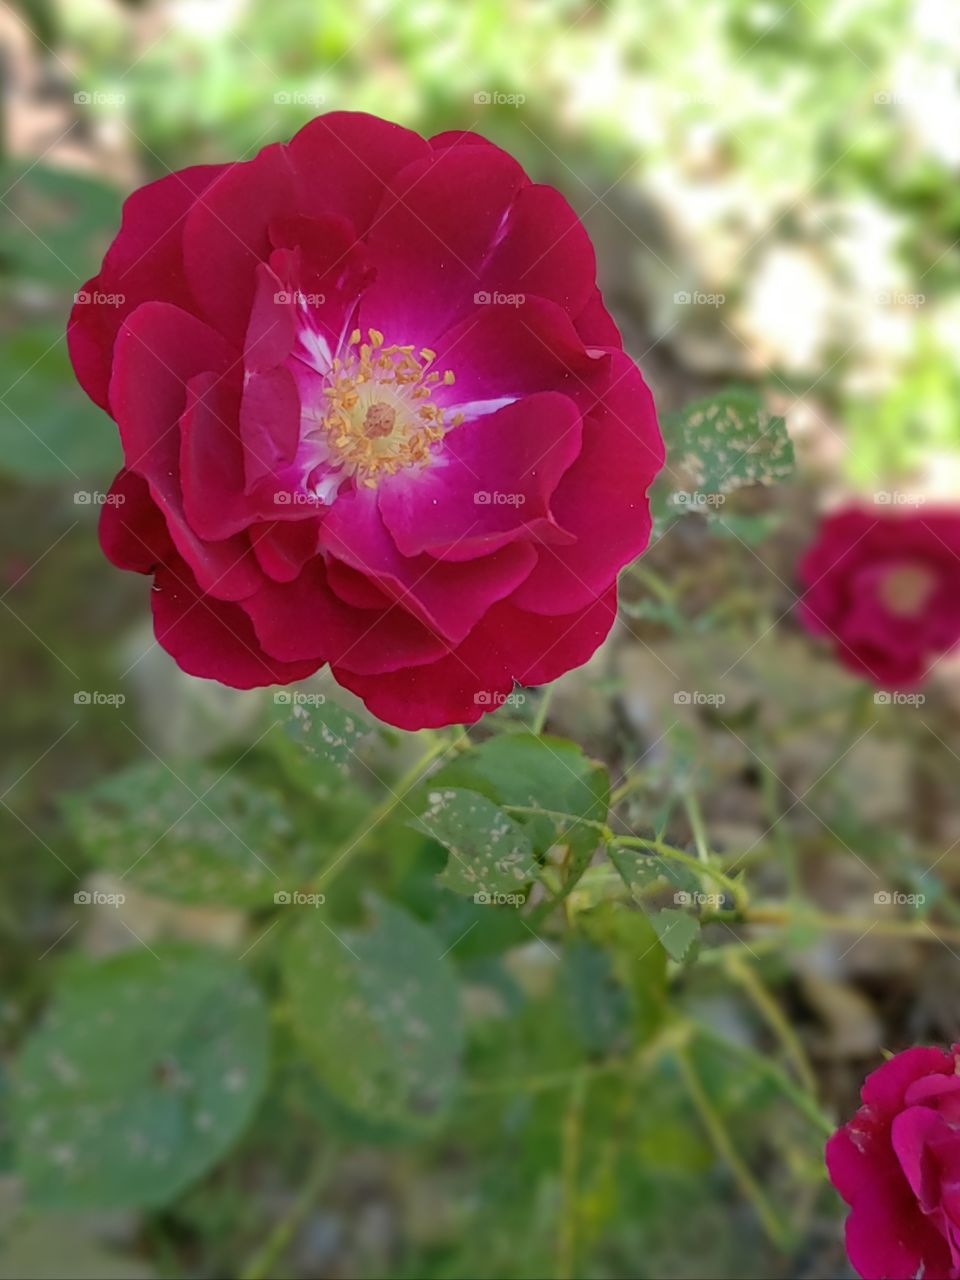 Rose growing in shade, beauty among thorns